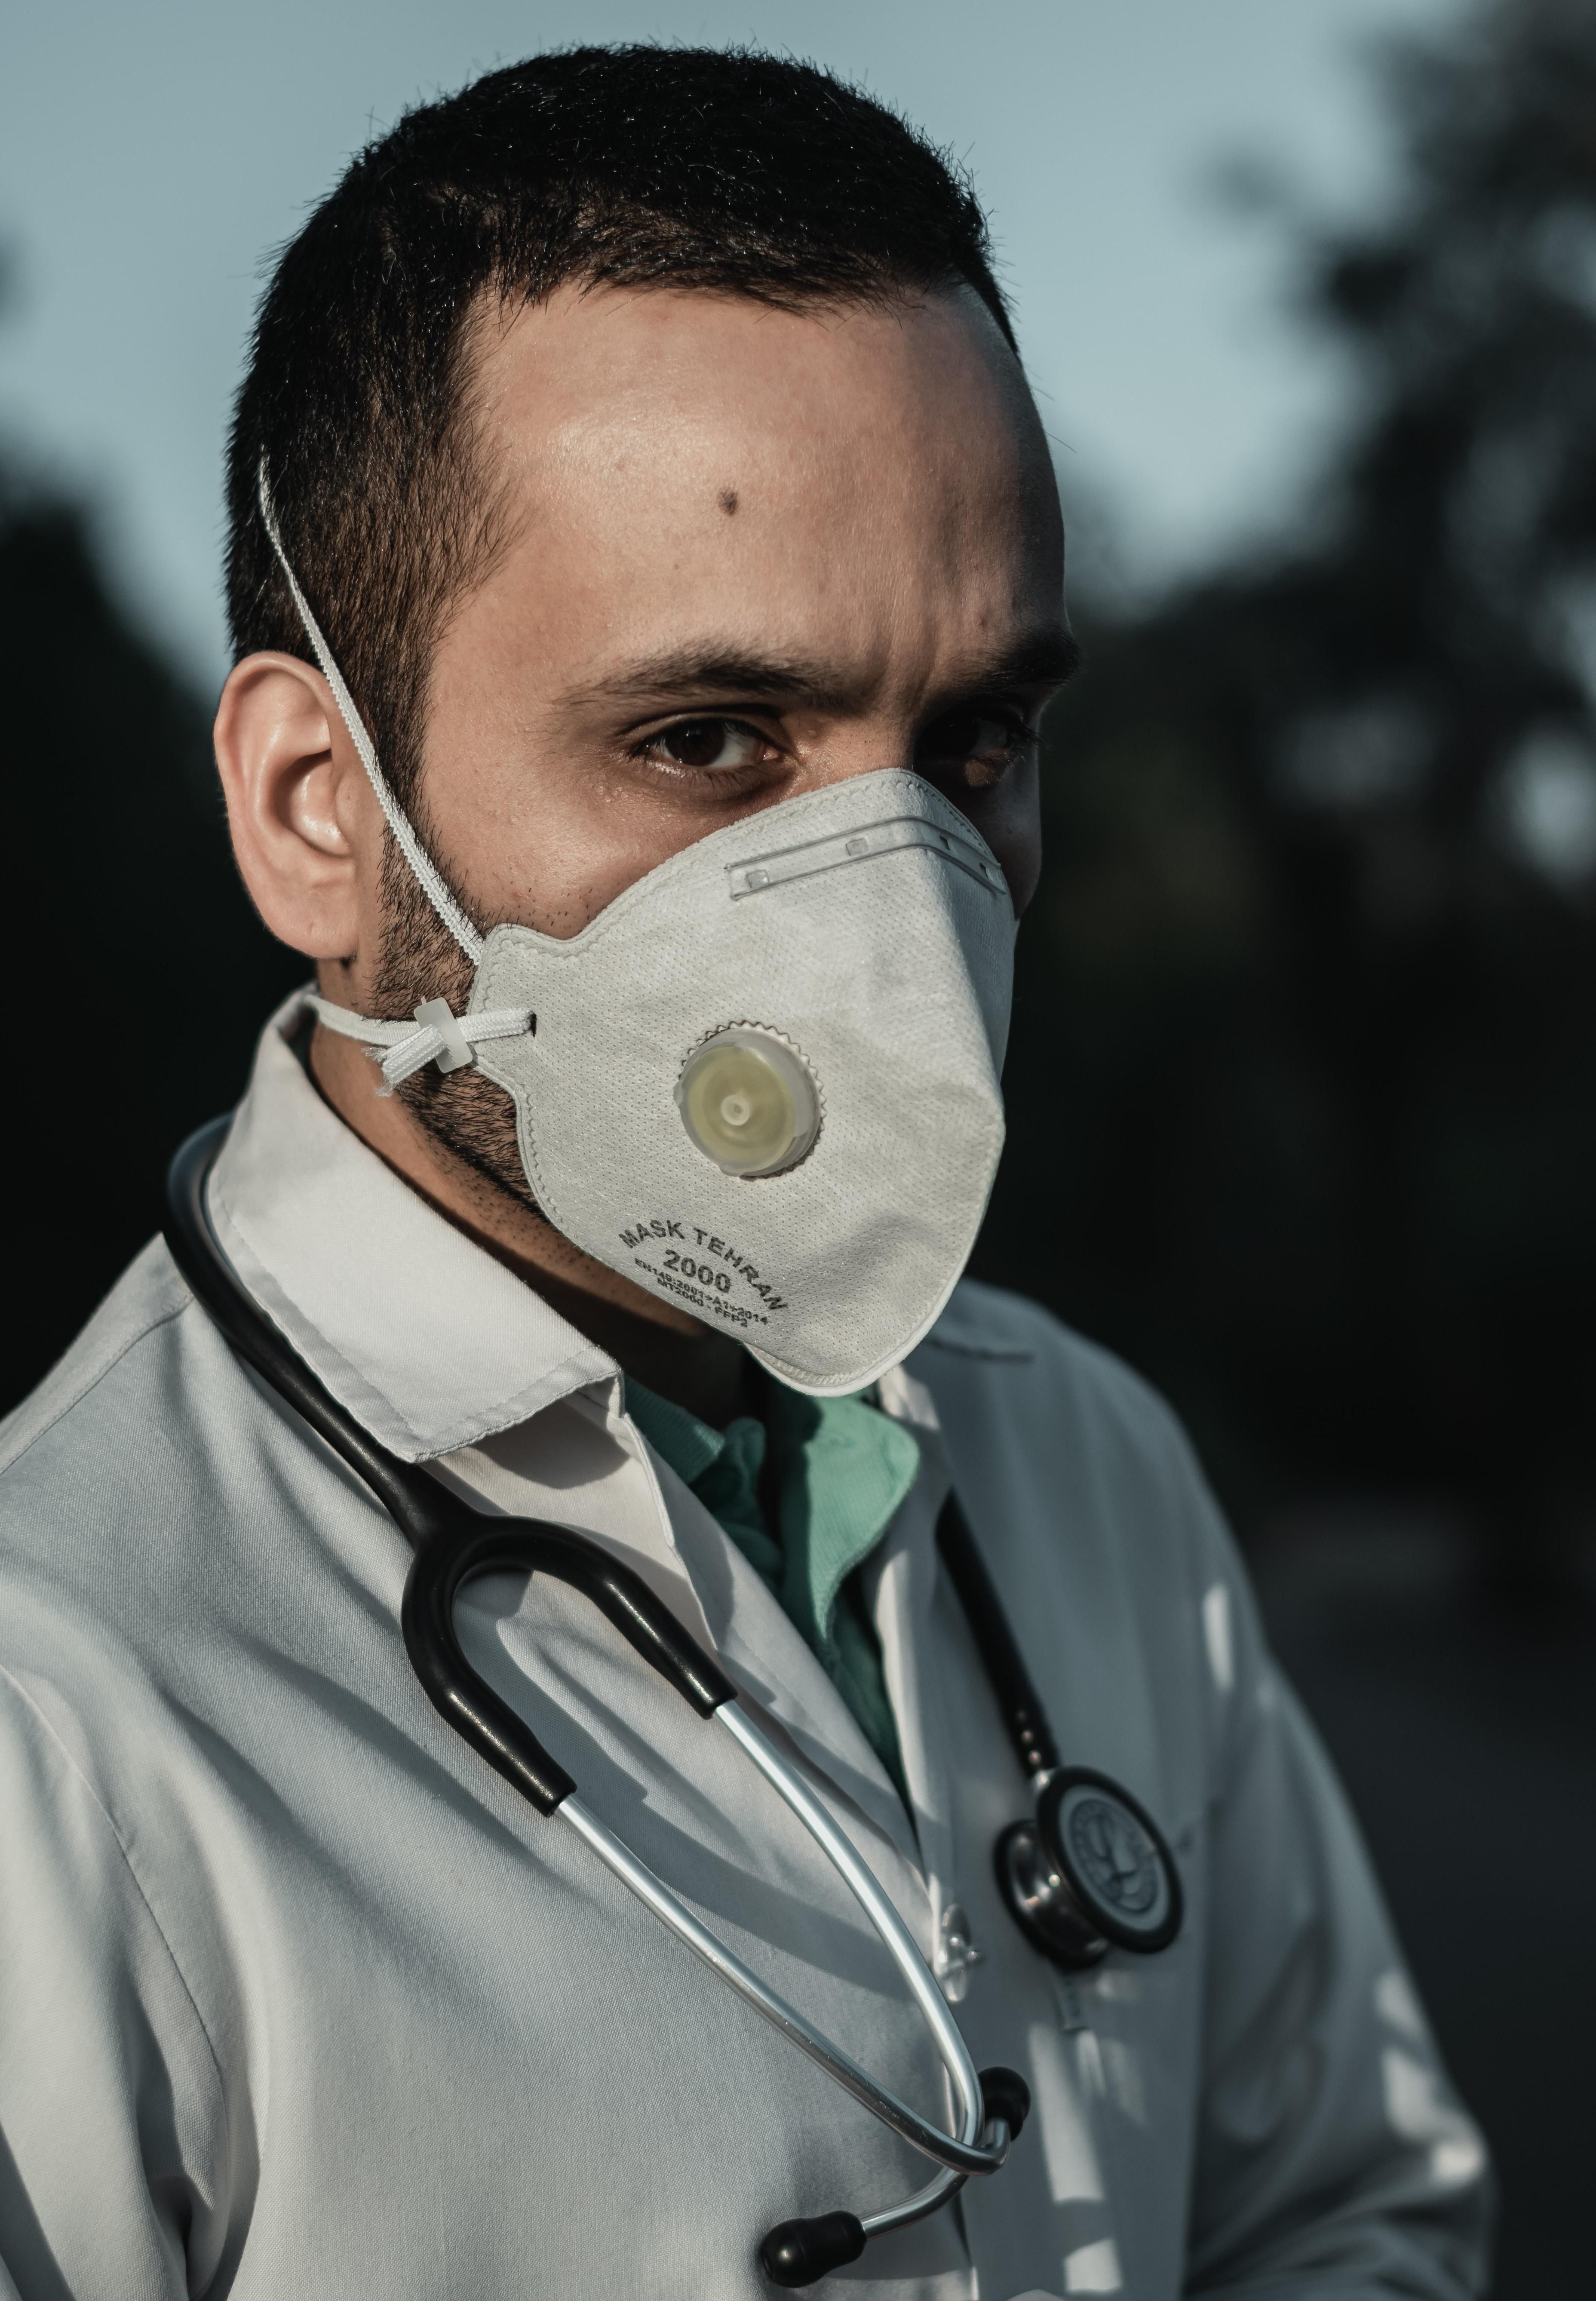 Doctors Are Being Laid Off, Overworked During A Pandemic